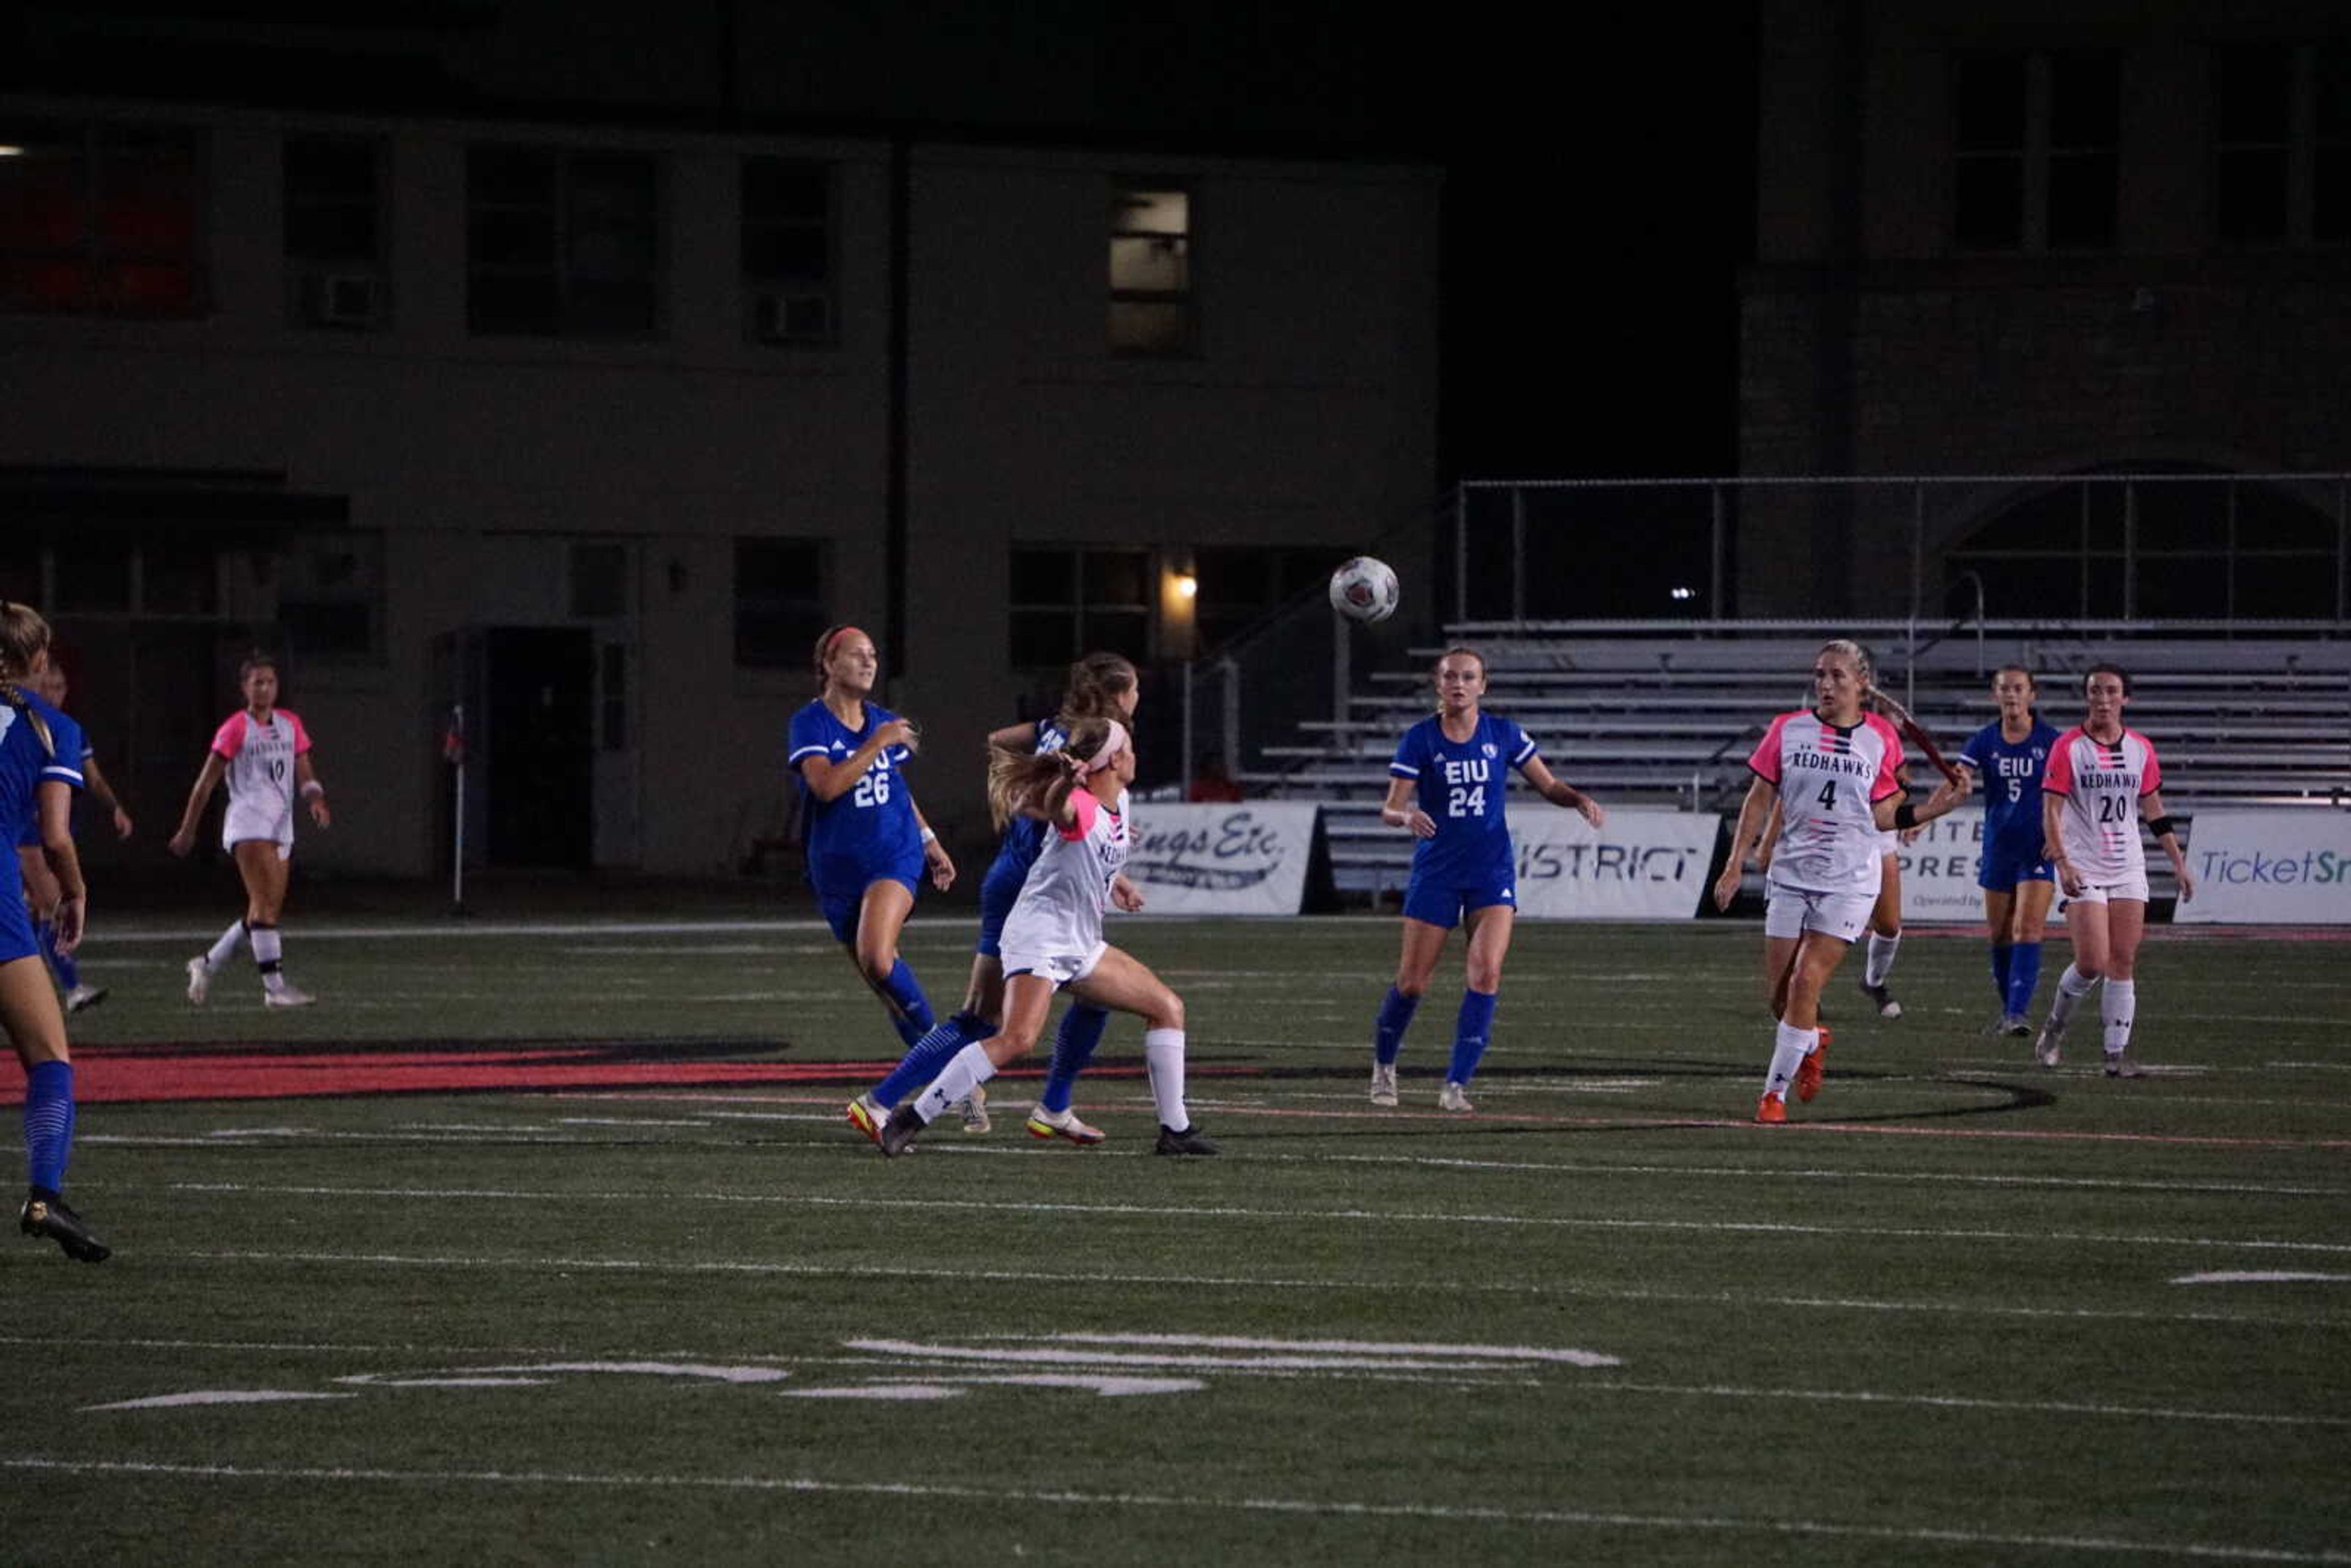 Freshman forward Katelyn Miller battles for the ball during Southeast's 1-0 win over Eastern Illinois on Oct. 14, 2021 at Houck Stadium in Cape Girardeau.